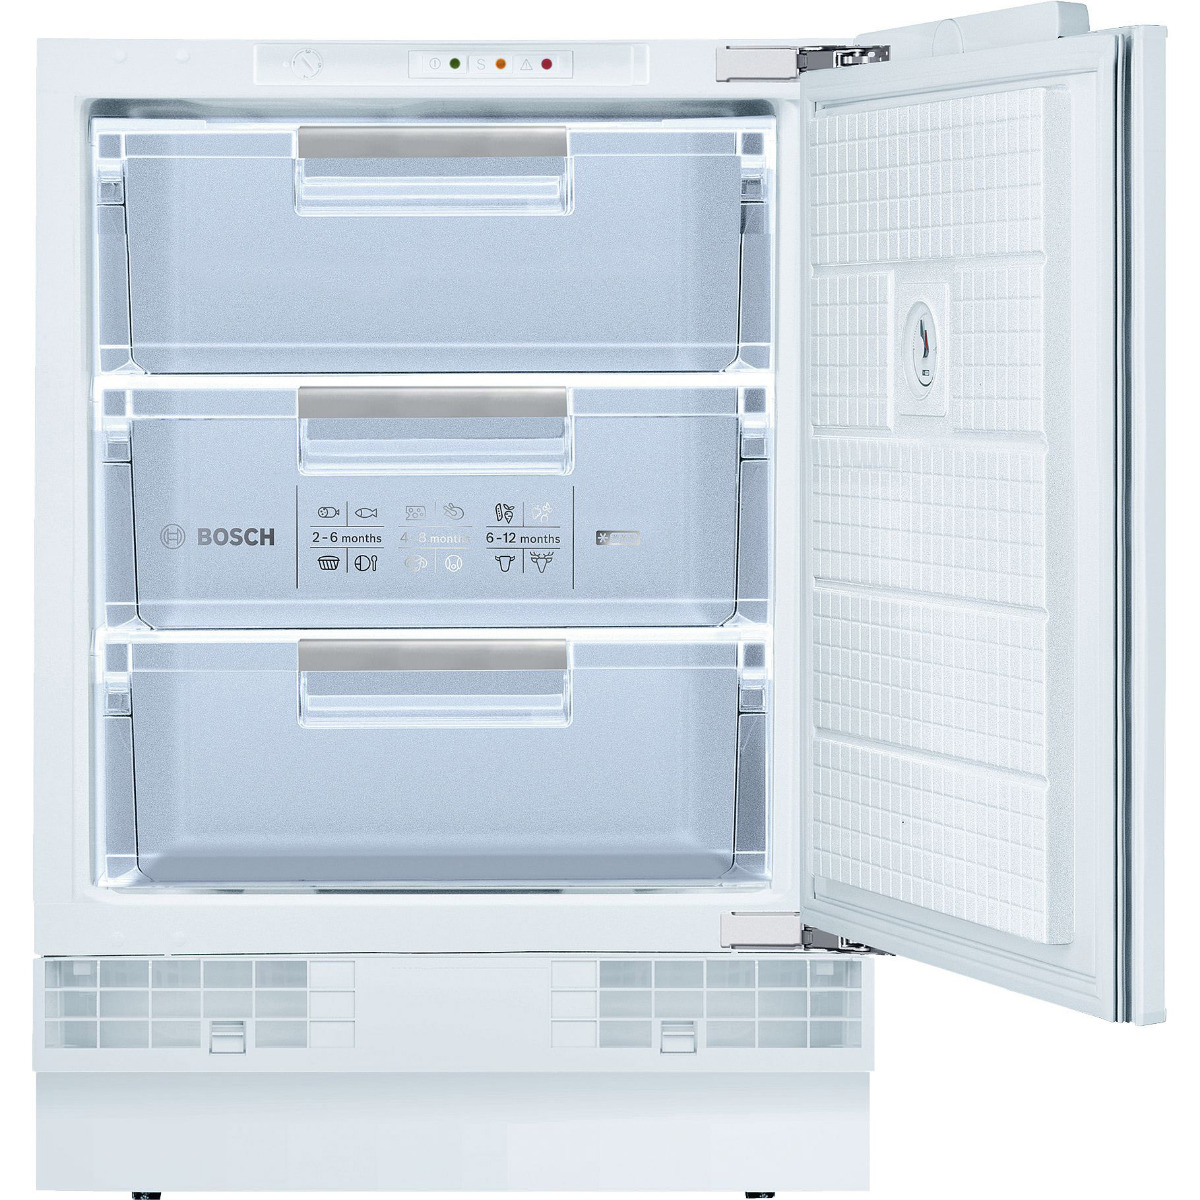 Bosch GUD15A50GB Fully Integrated Under Counter Freezer With Fixed Door Fixing Kit A+